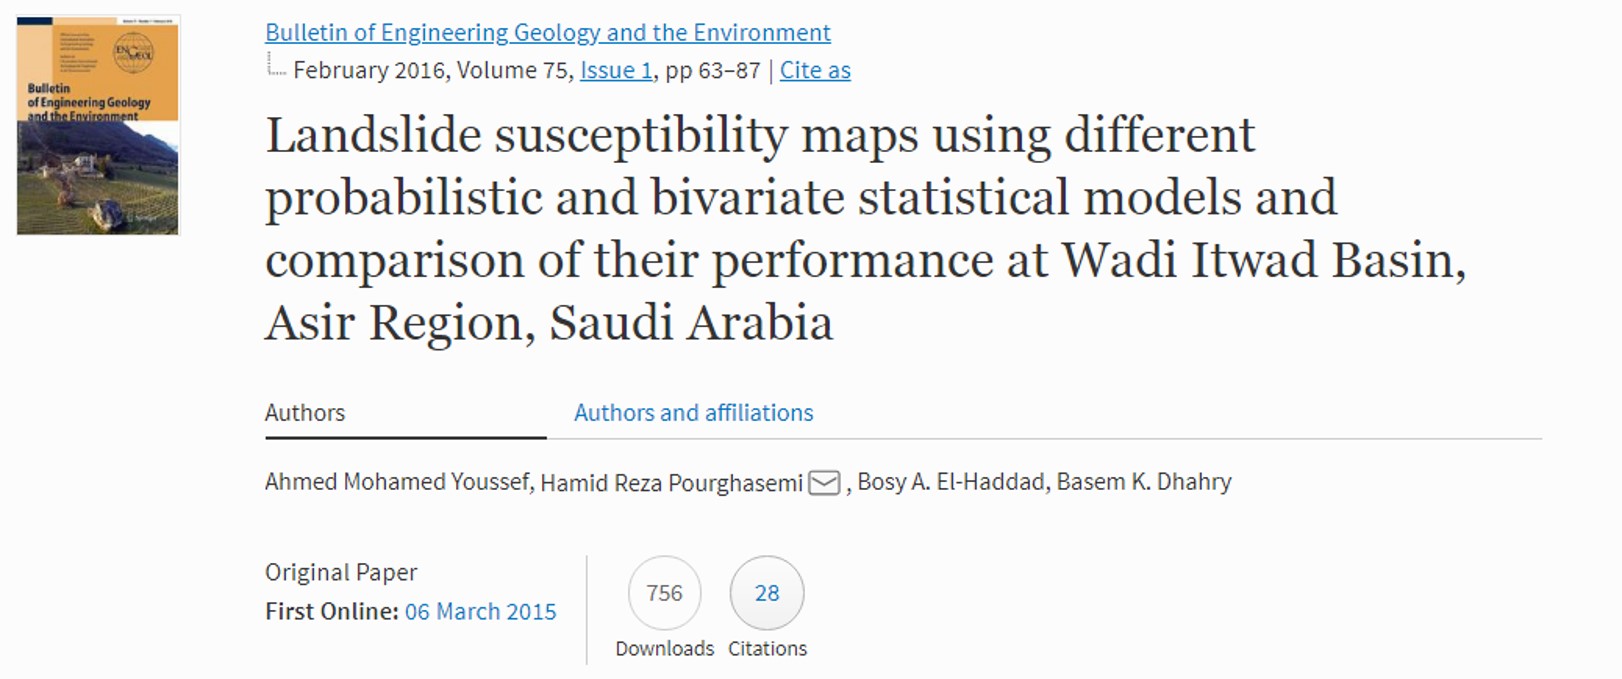 Landslide susceptibility maps using different probabilistic and bivariate statistical models and comparison of their performance at Wadi Itwad Basin, Asir region, Saudi Arabia